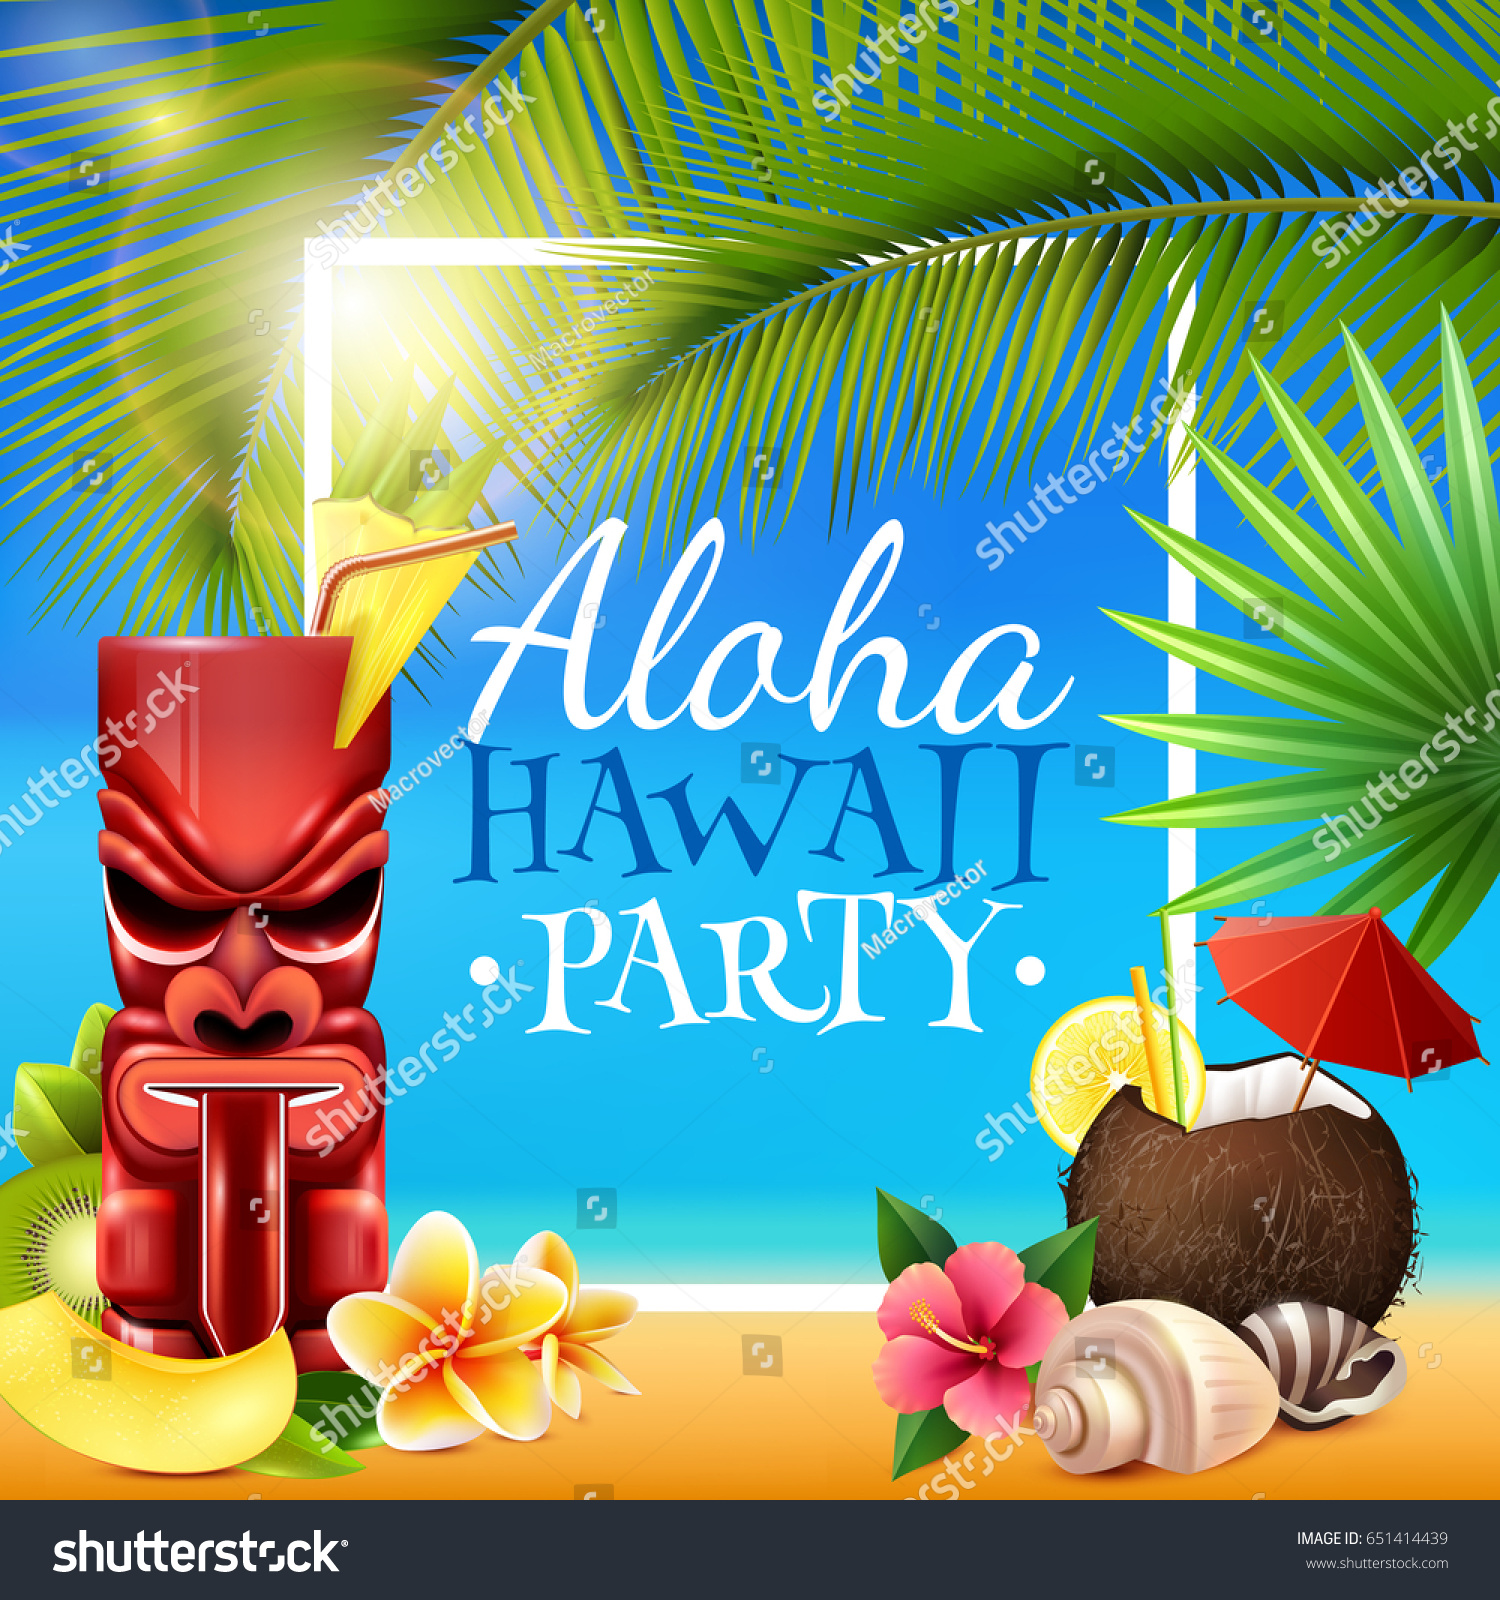 SVG of Hawaiian party frame with tiki mug, coconut cocktail, shells, flowers, palm branches on blue background vector illustration svg